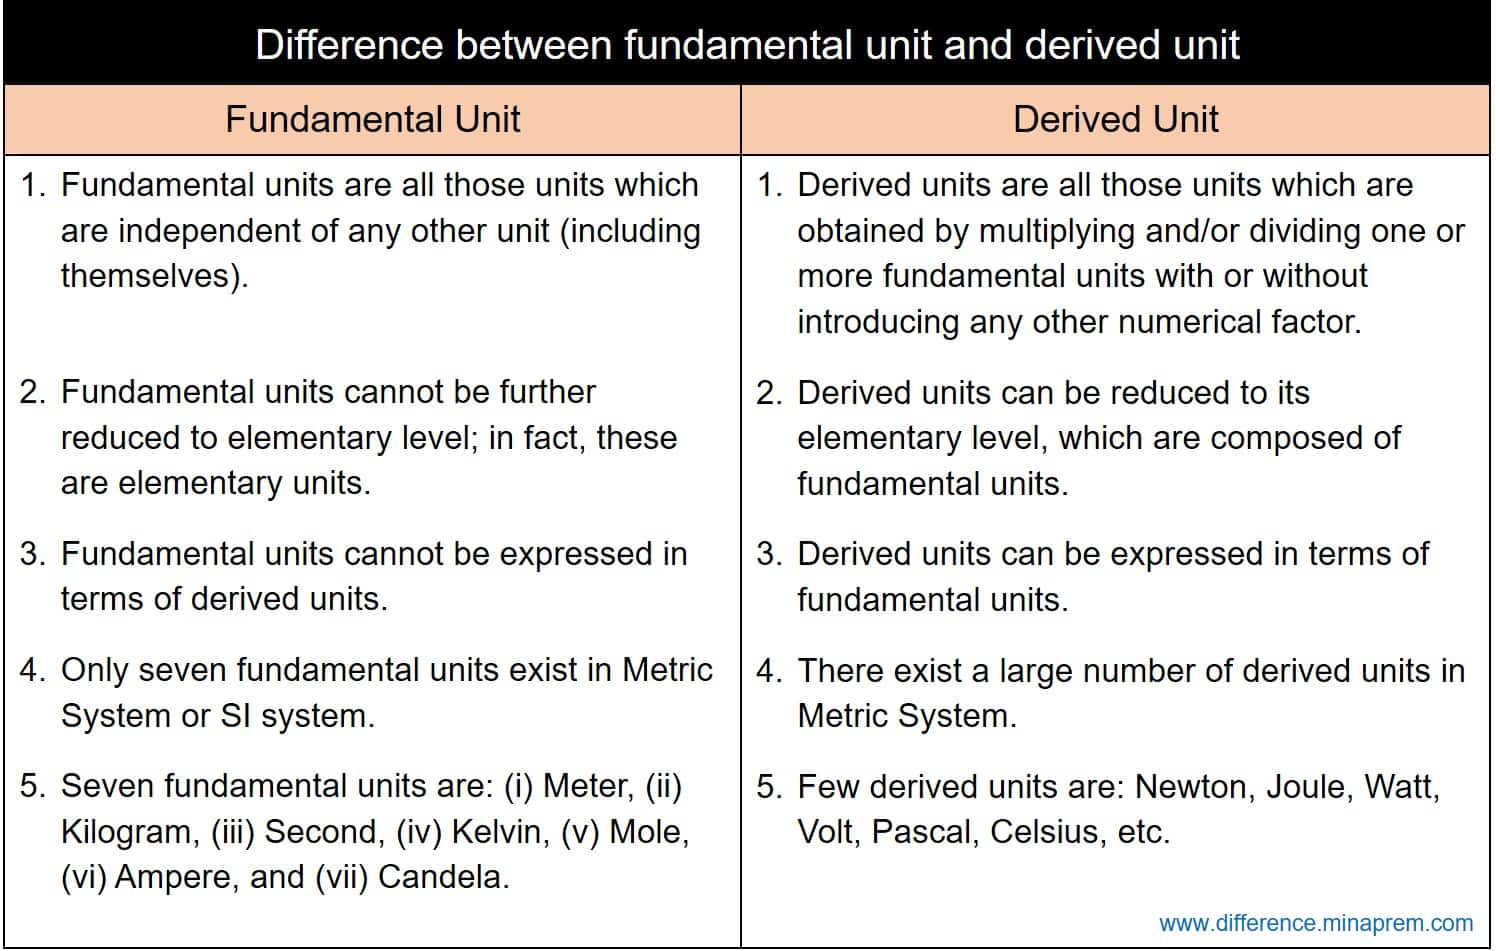 Difference between fundamental unit and derived unit